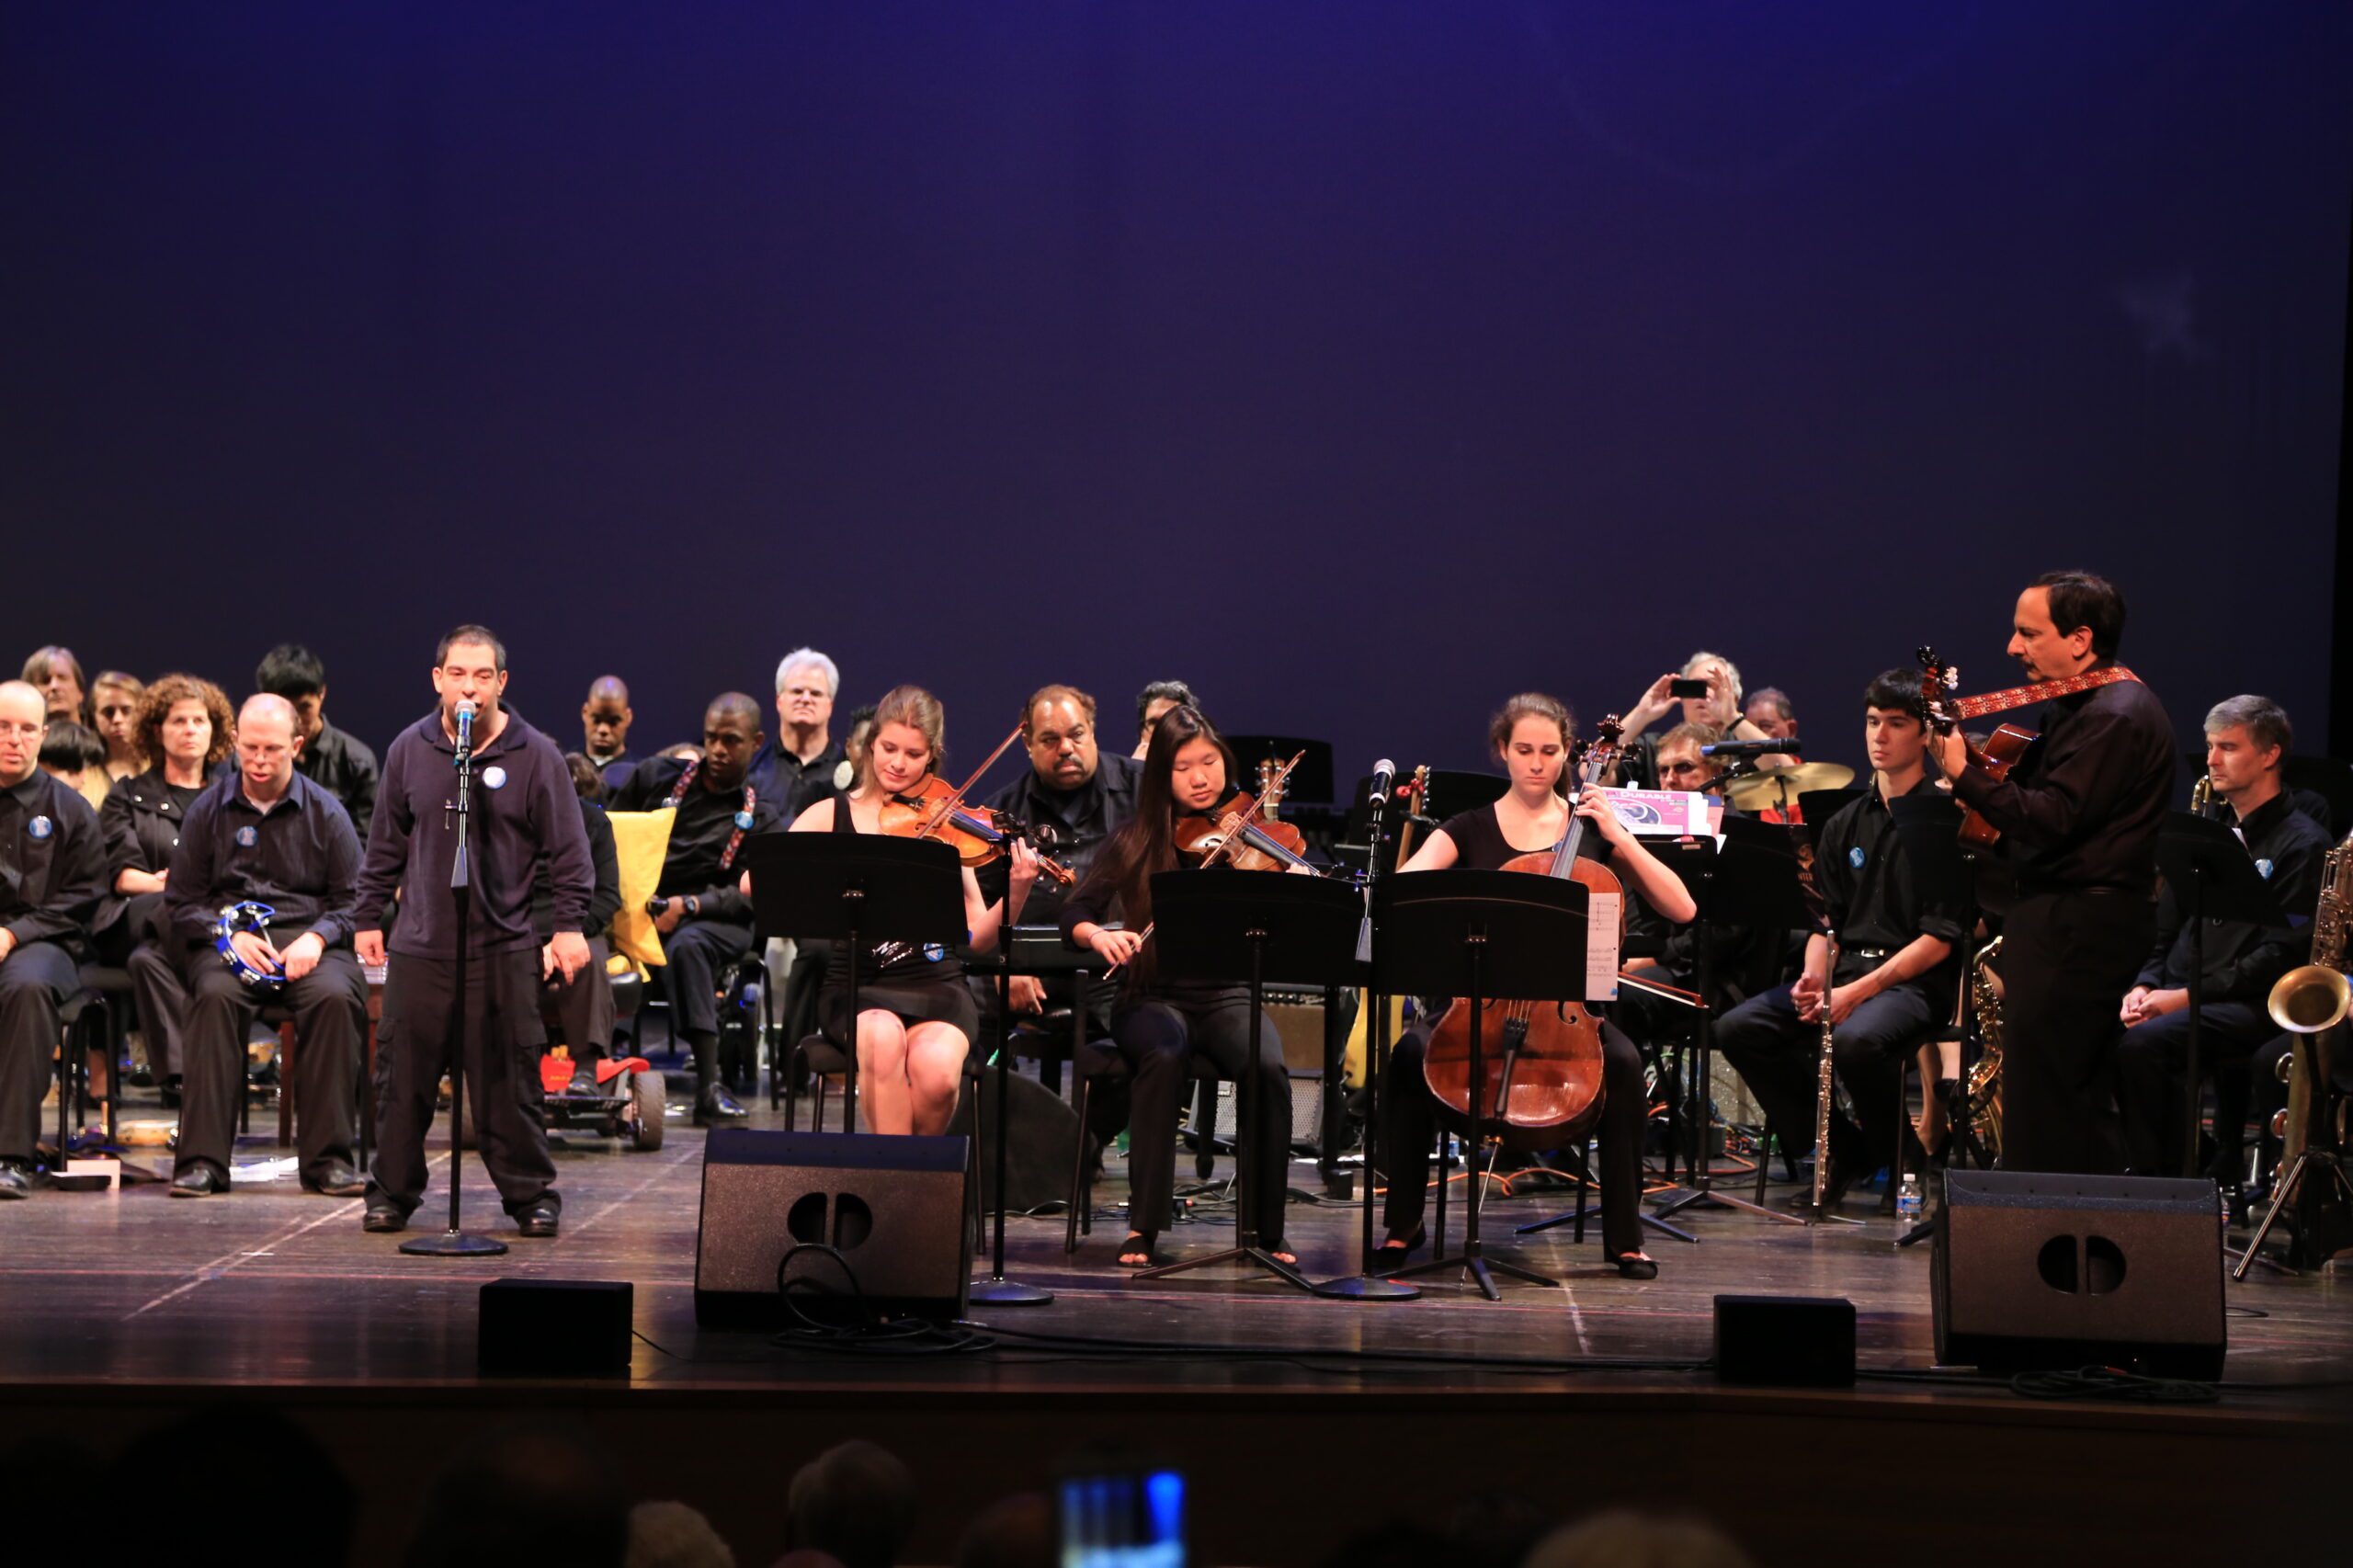 The interPLAY Orchestra Strikes a Chord with Inclusive Ensemble